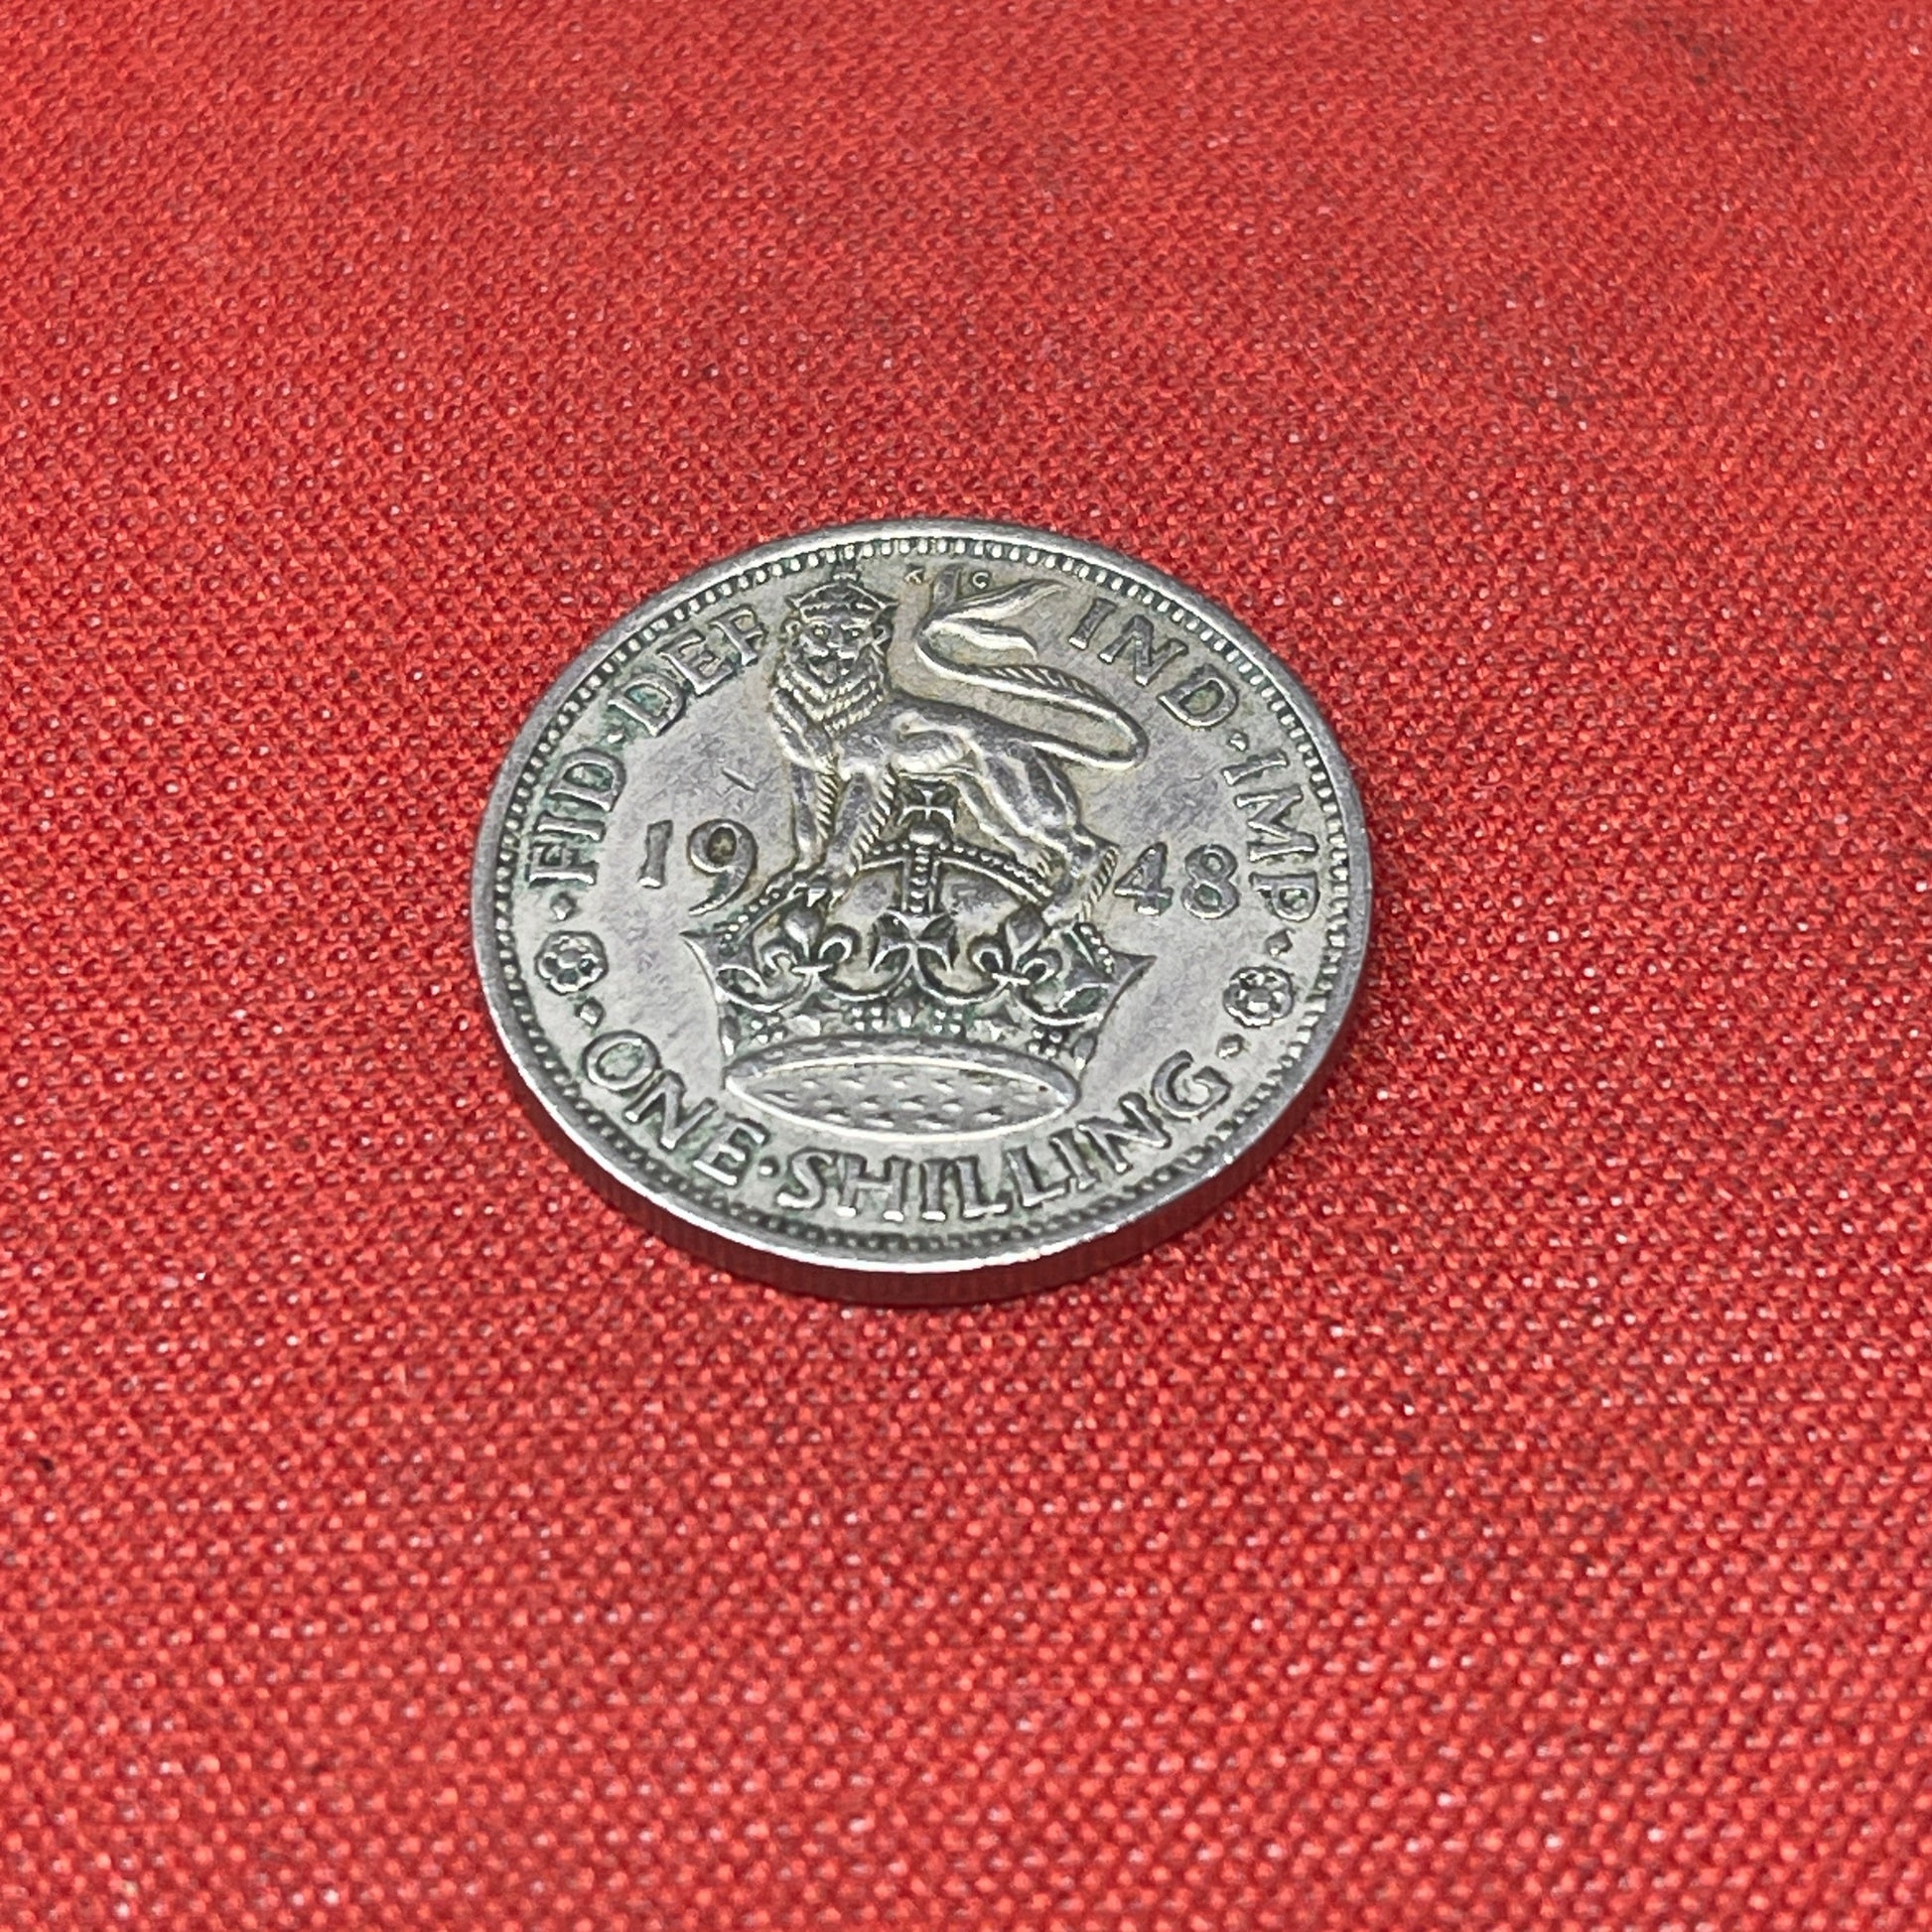 1948 King George VI One Shilling